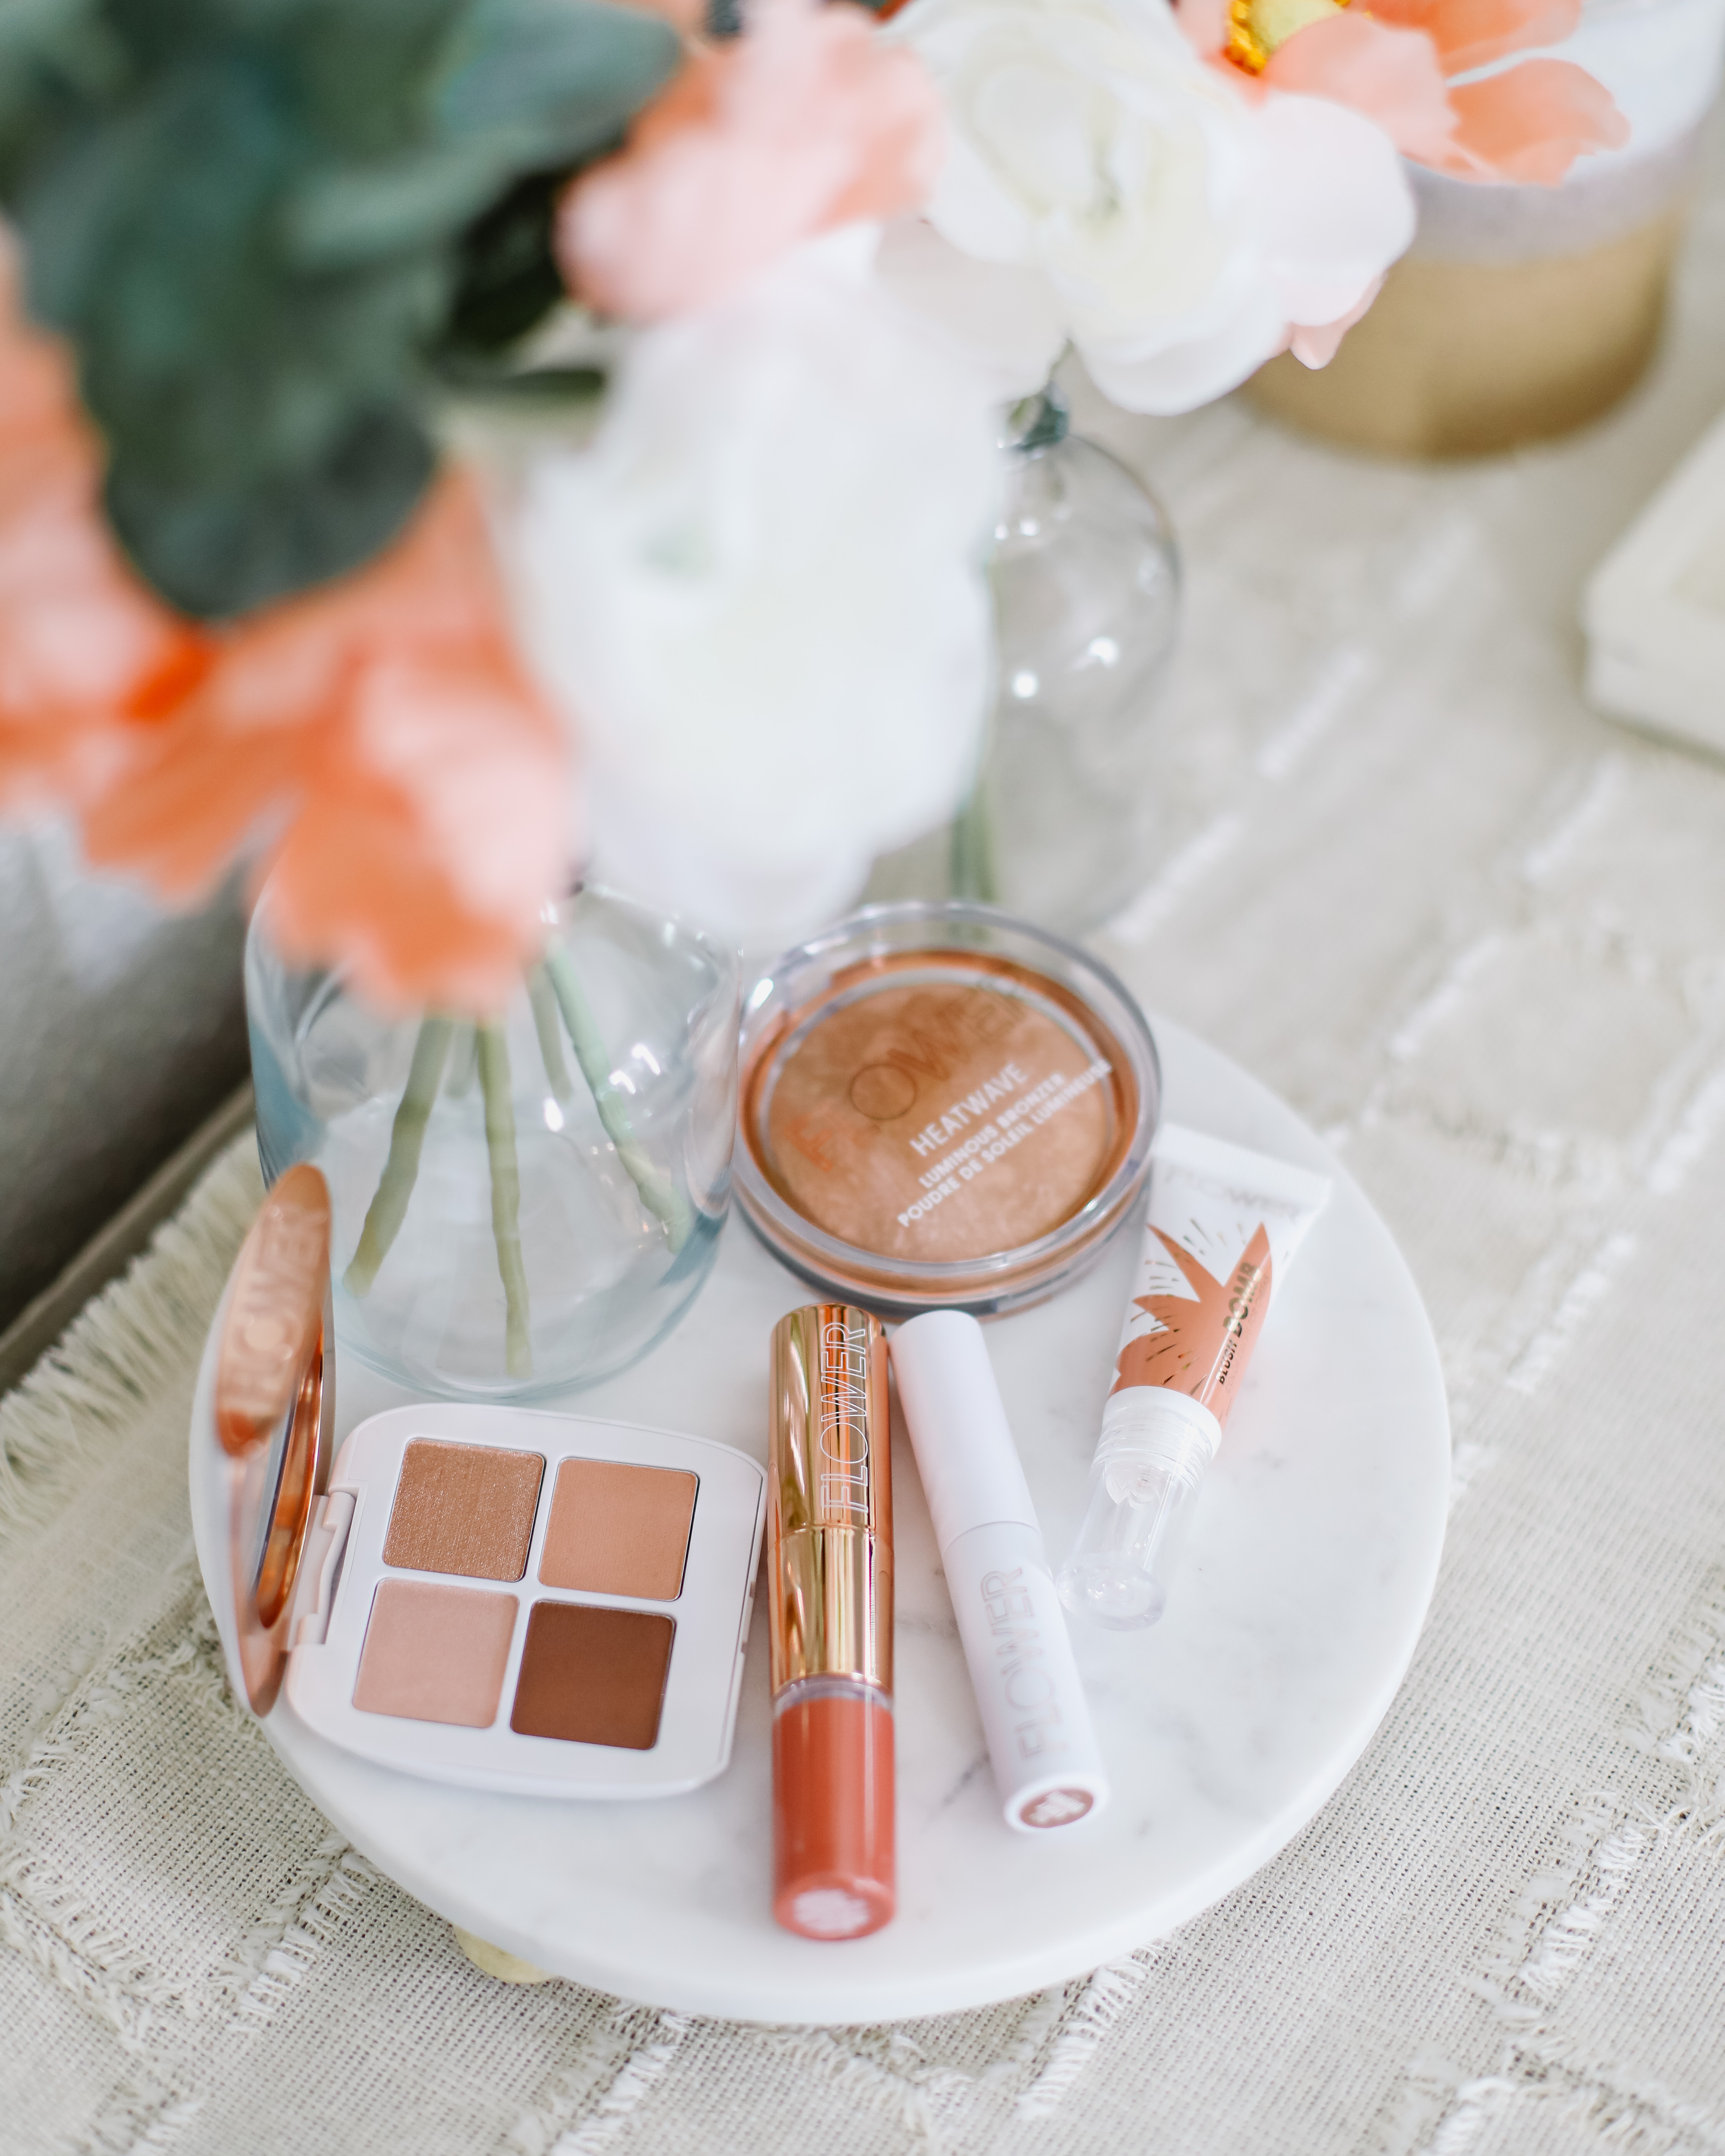 Flower Beauty Makeup Review | Affordable by Amanda | Flower Beauty Blush Bomb. Flower Beauty Foundation. Where to Buy Flower Beauty. Flower Beauty at Walmart. FLOWER by Drew Barrymore.